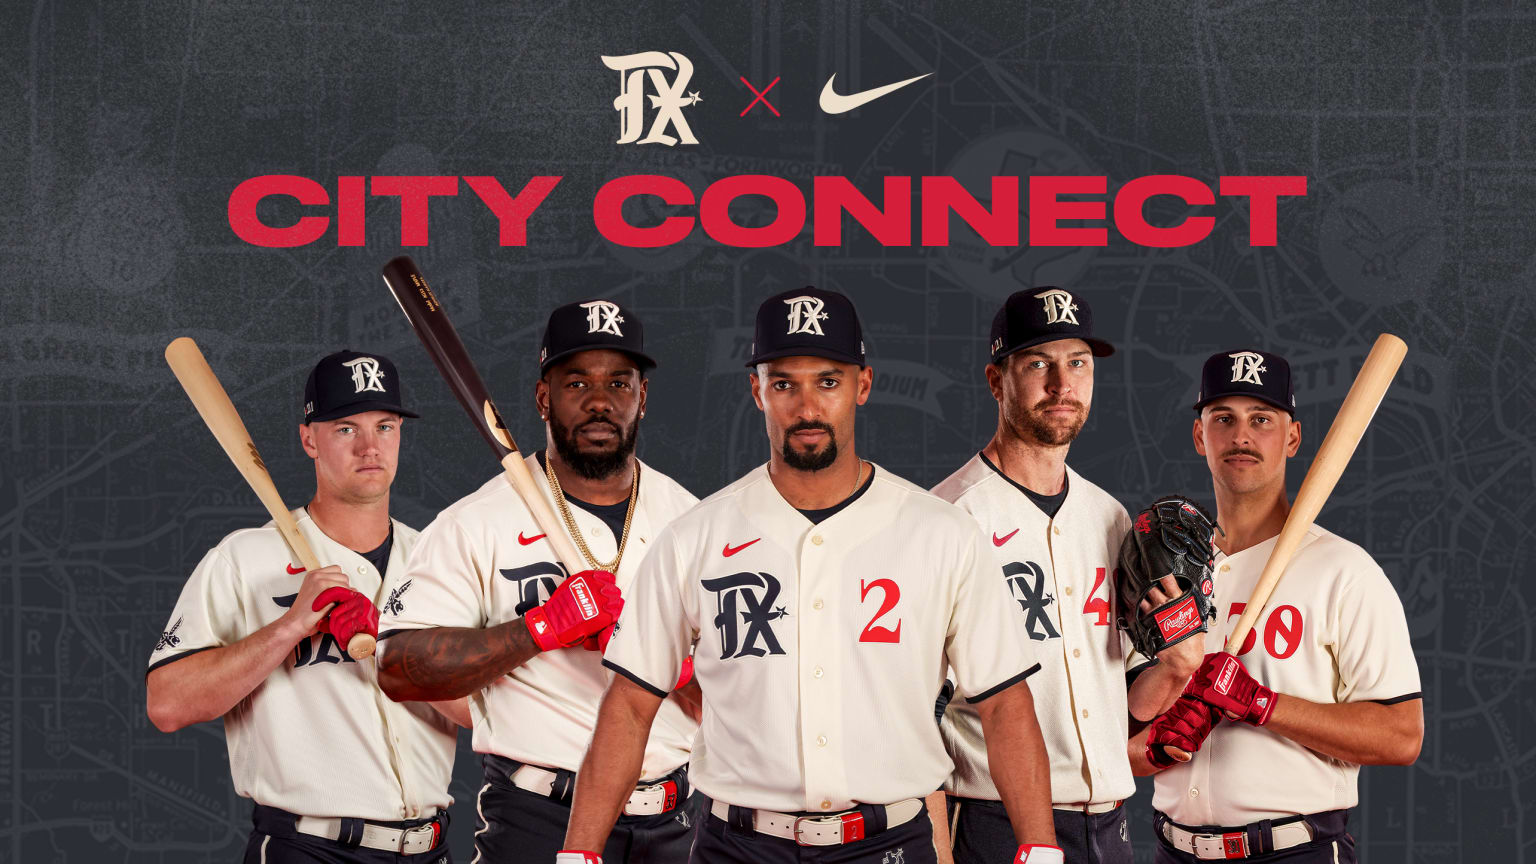 white sox city connect jerseys